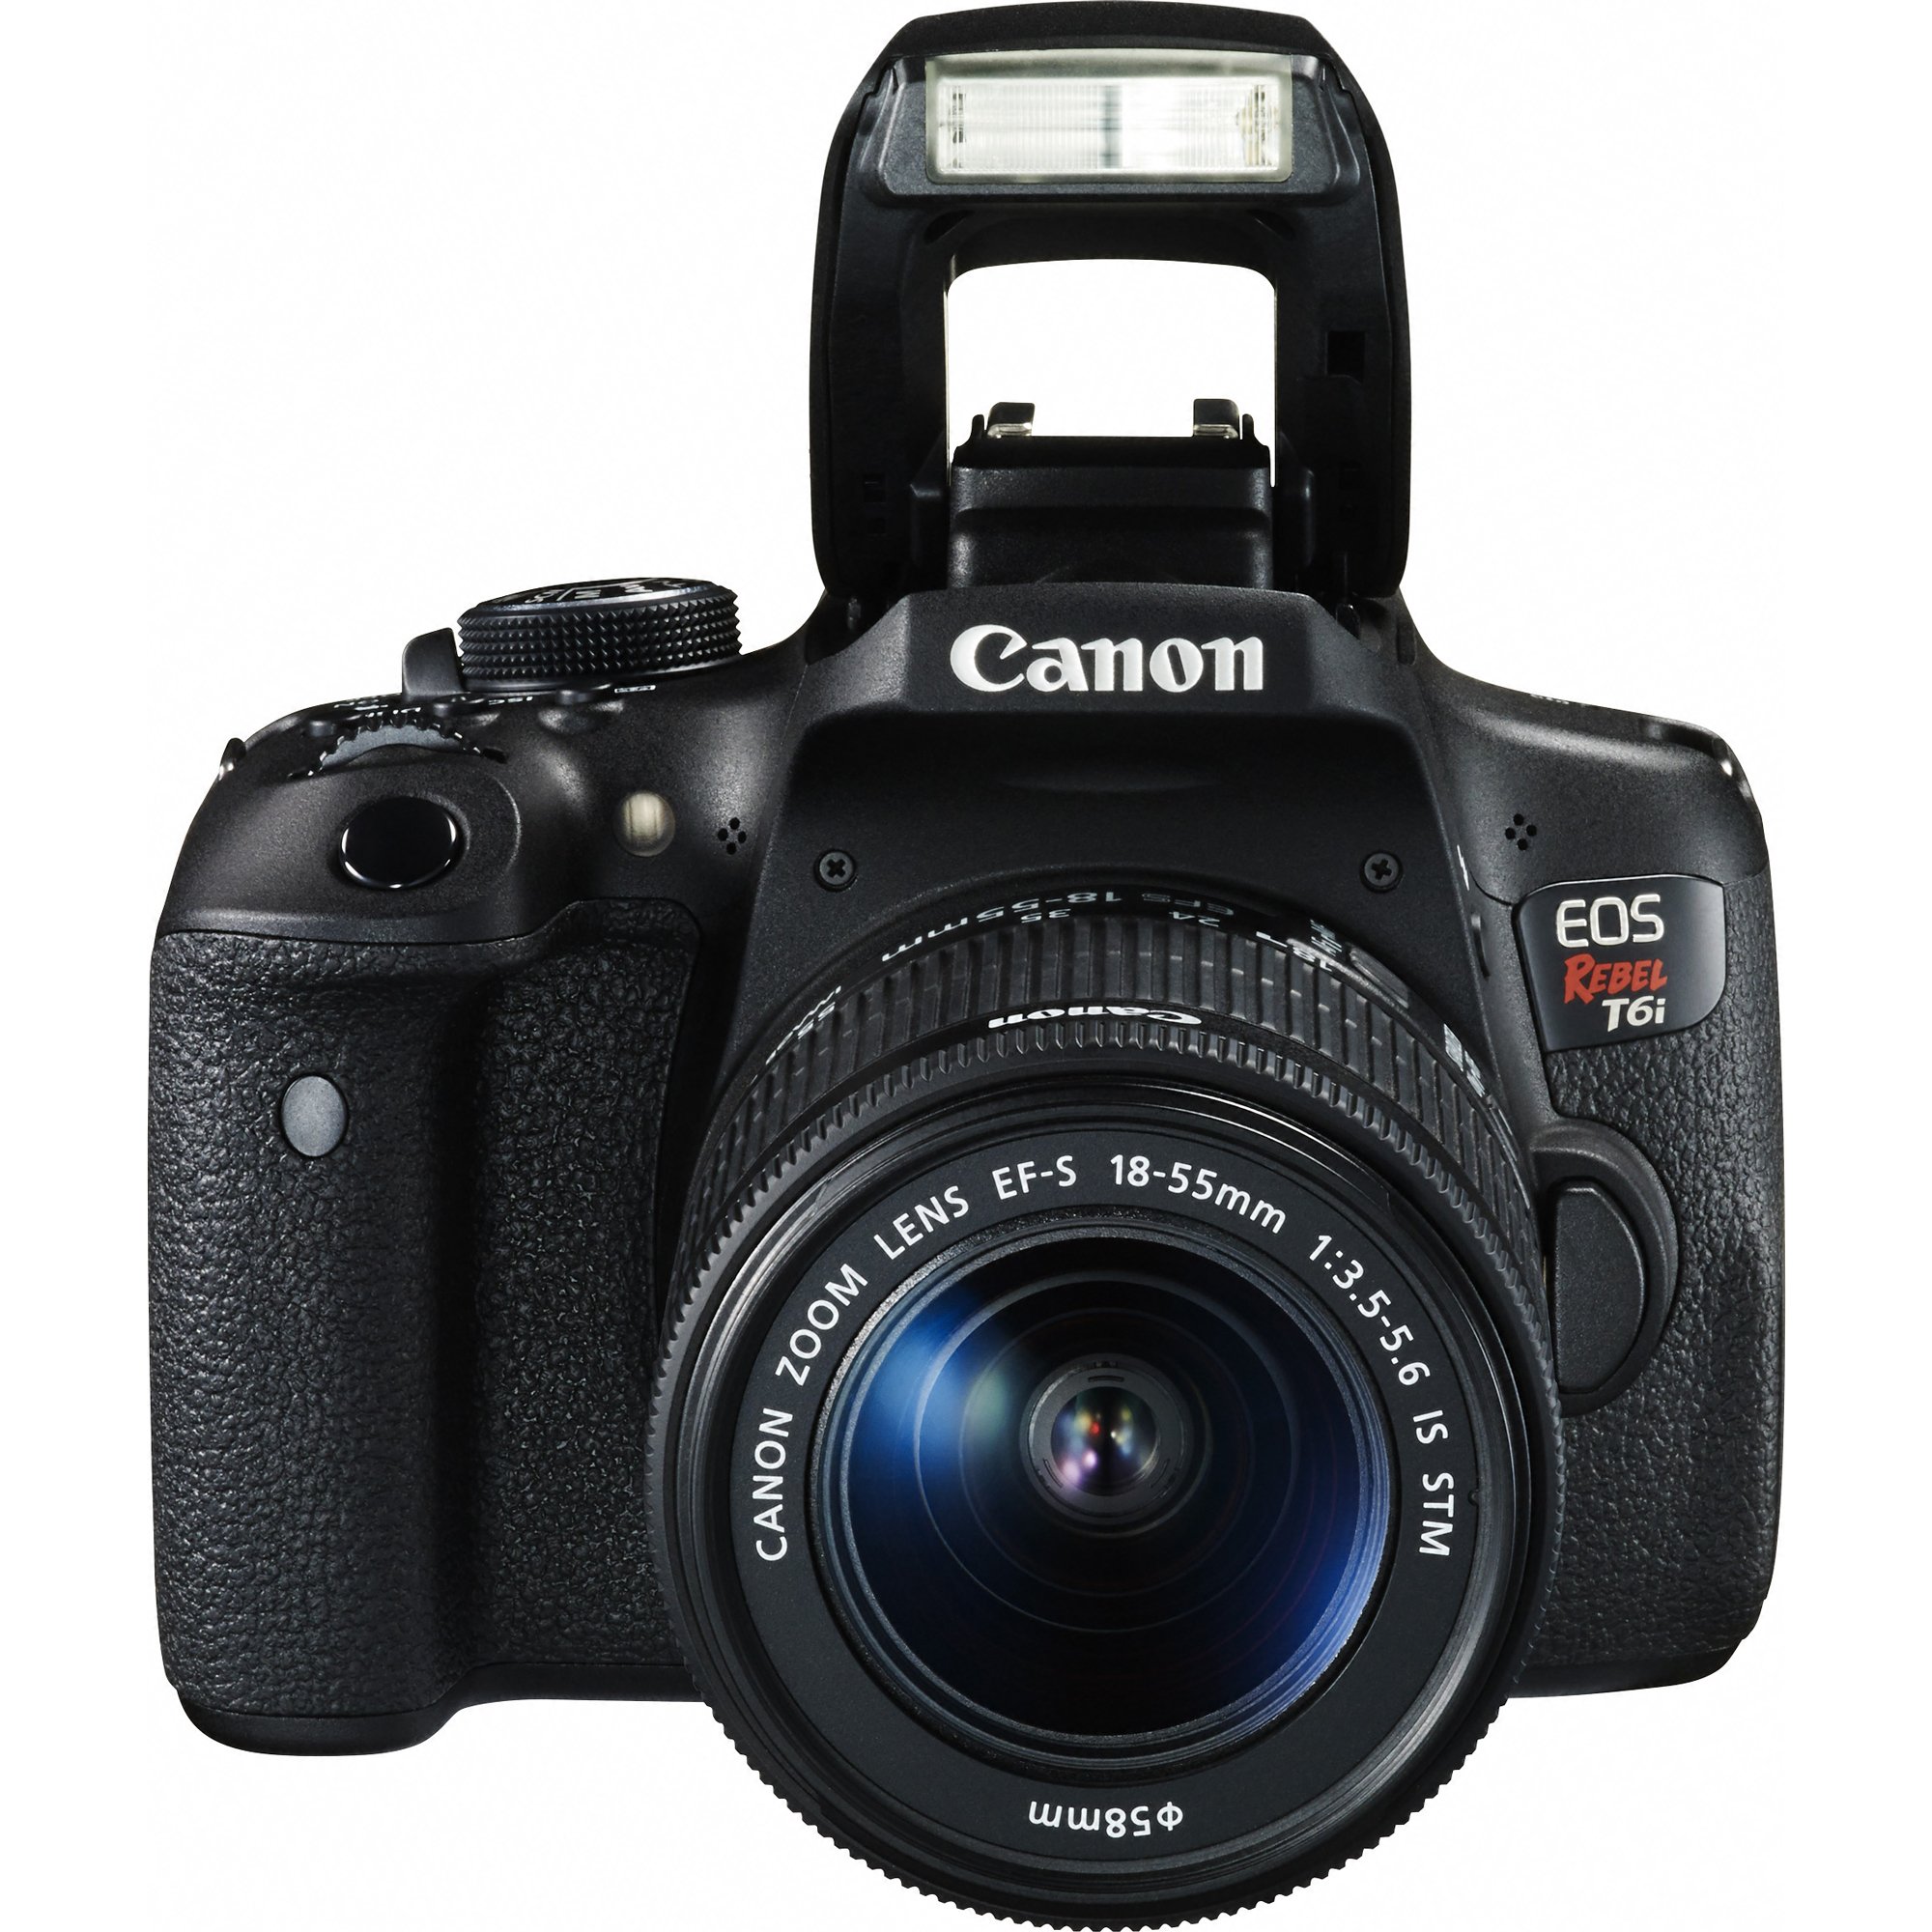 Canon EOS Rebel T6i Digital SLR with EF-S 18-55mm is STM Lens - Wi-Fi Enabled